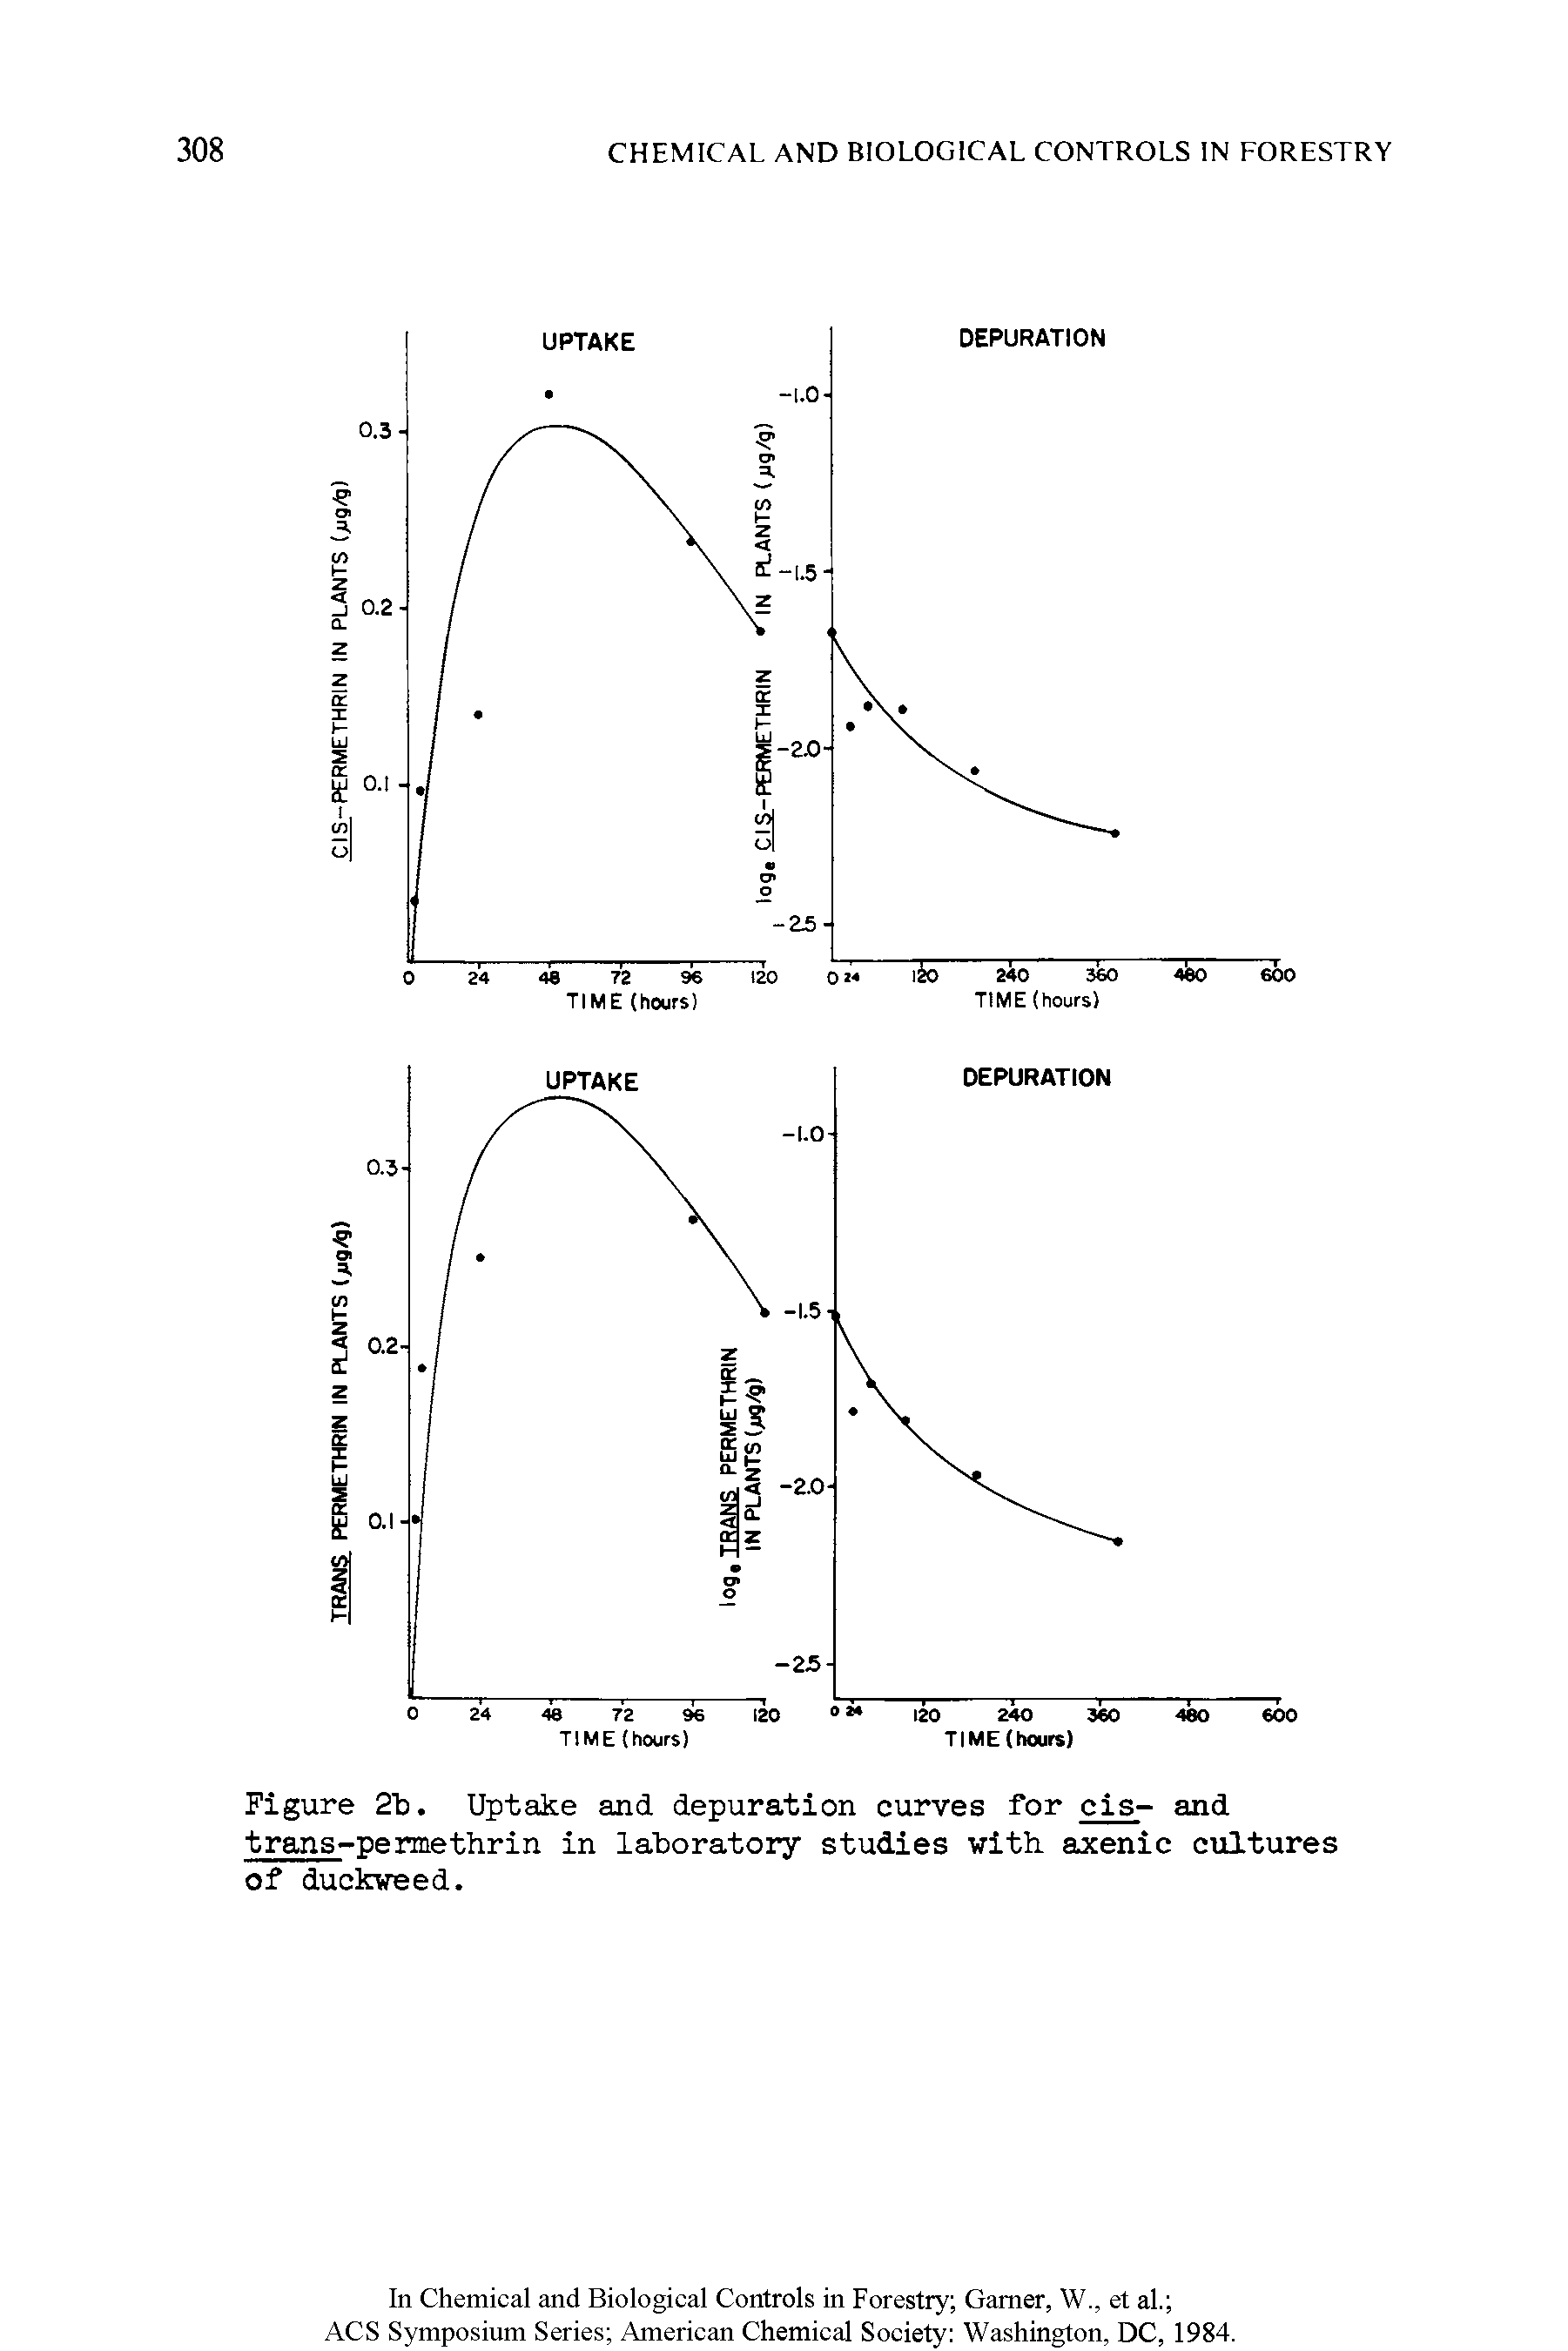 Figure 2b. Uptake and depuration curves for cis- and trans-permethrin in laboratory studies with axenic cultures of duckweed.